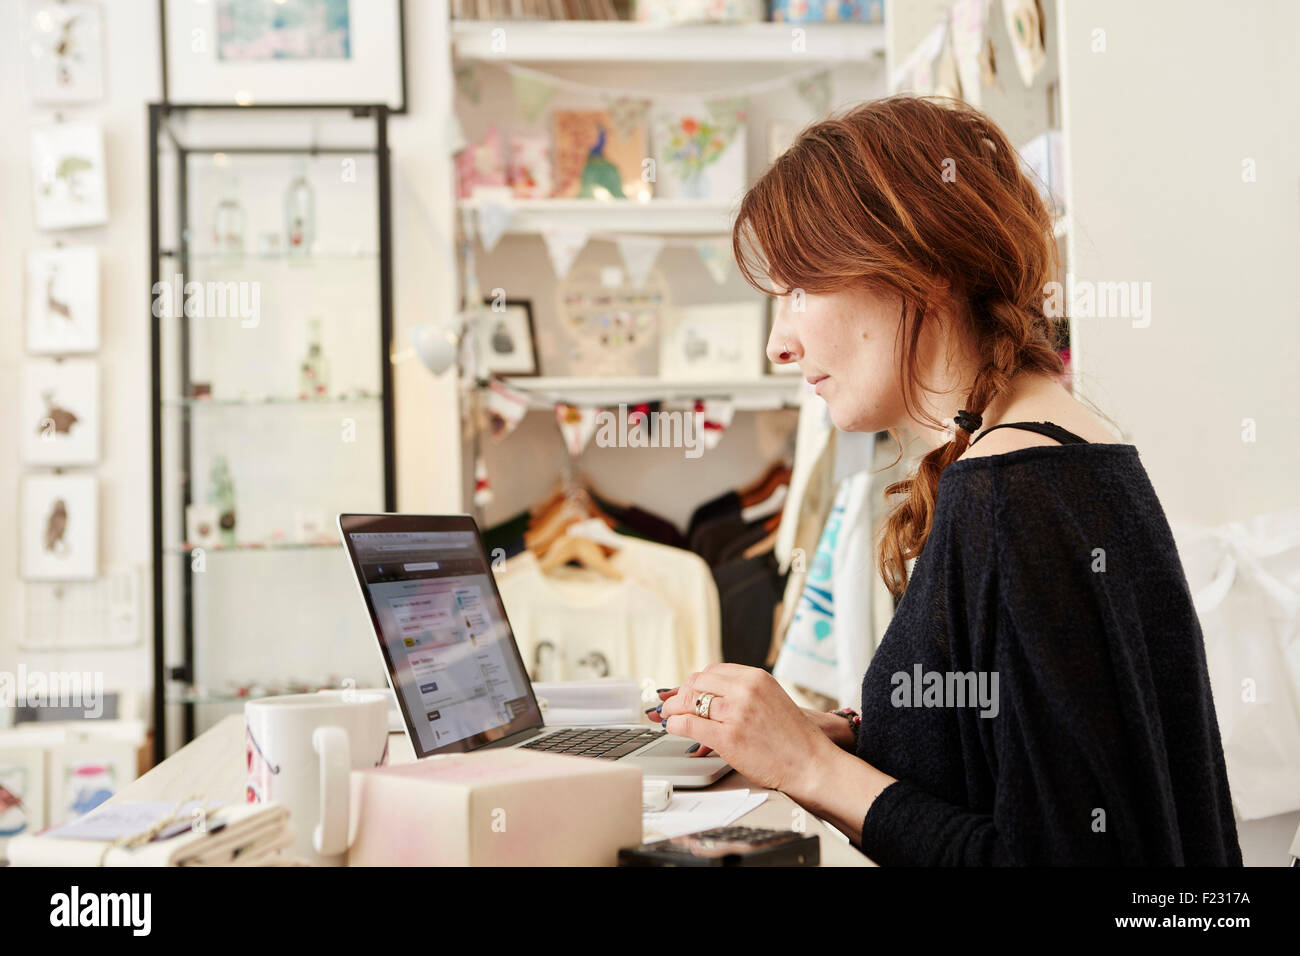 A woman in a small crafts supplier and gift shop, using a laptop, working, Stock Photo